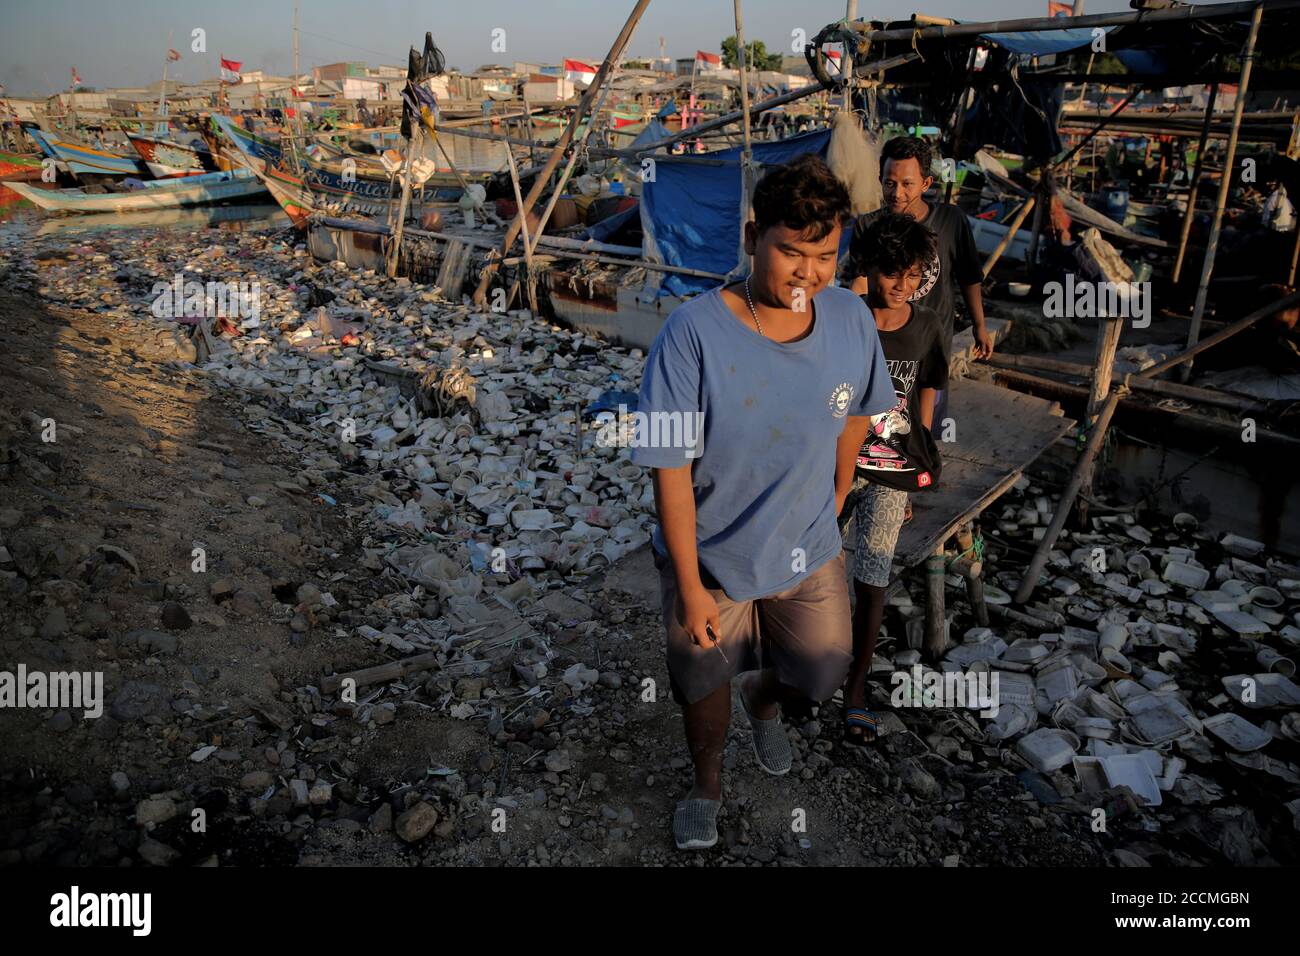 Residents walk through a pile of garbage.Plastic waste that has accumulated around the coast endangers marine life and local residents. Stock Photo